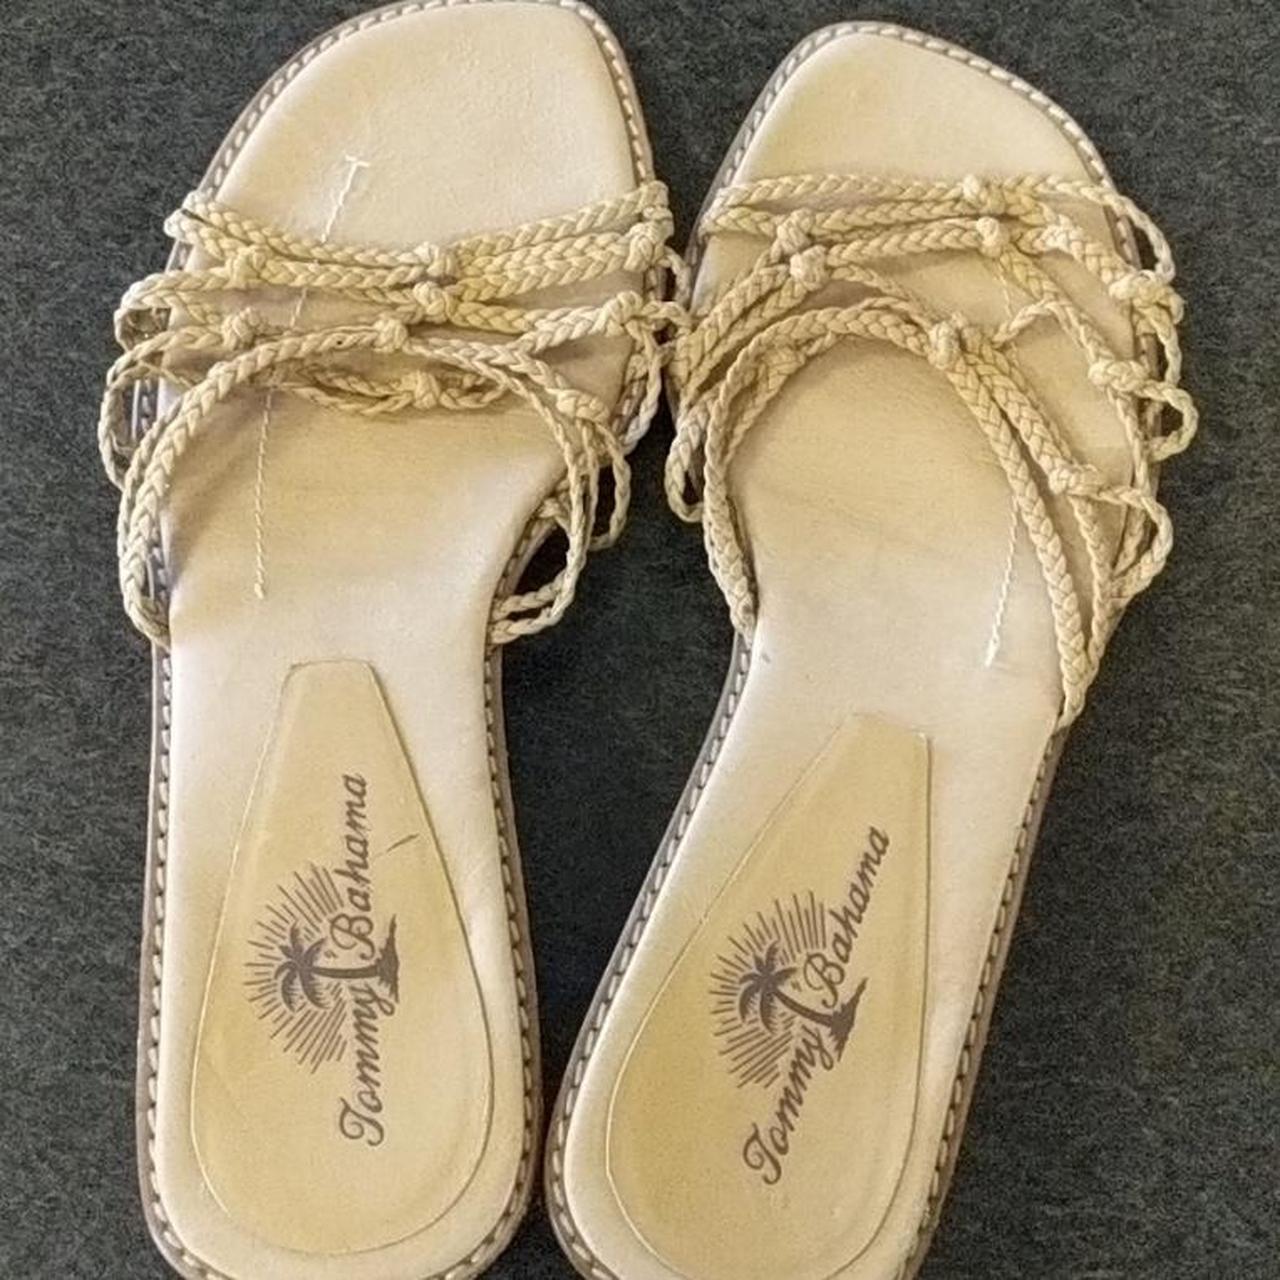 Tommy Bahama Women's Tan and Cream Sandals | Depop